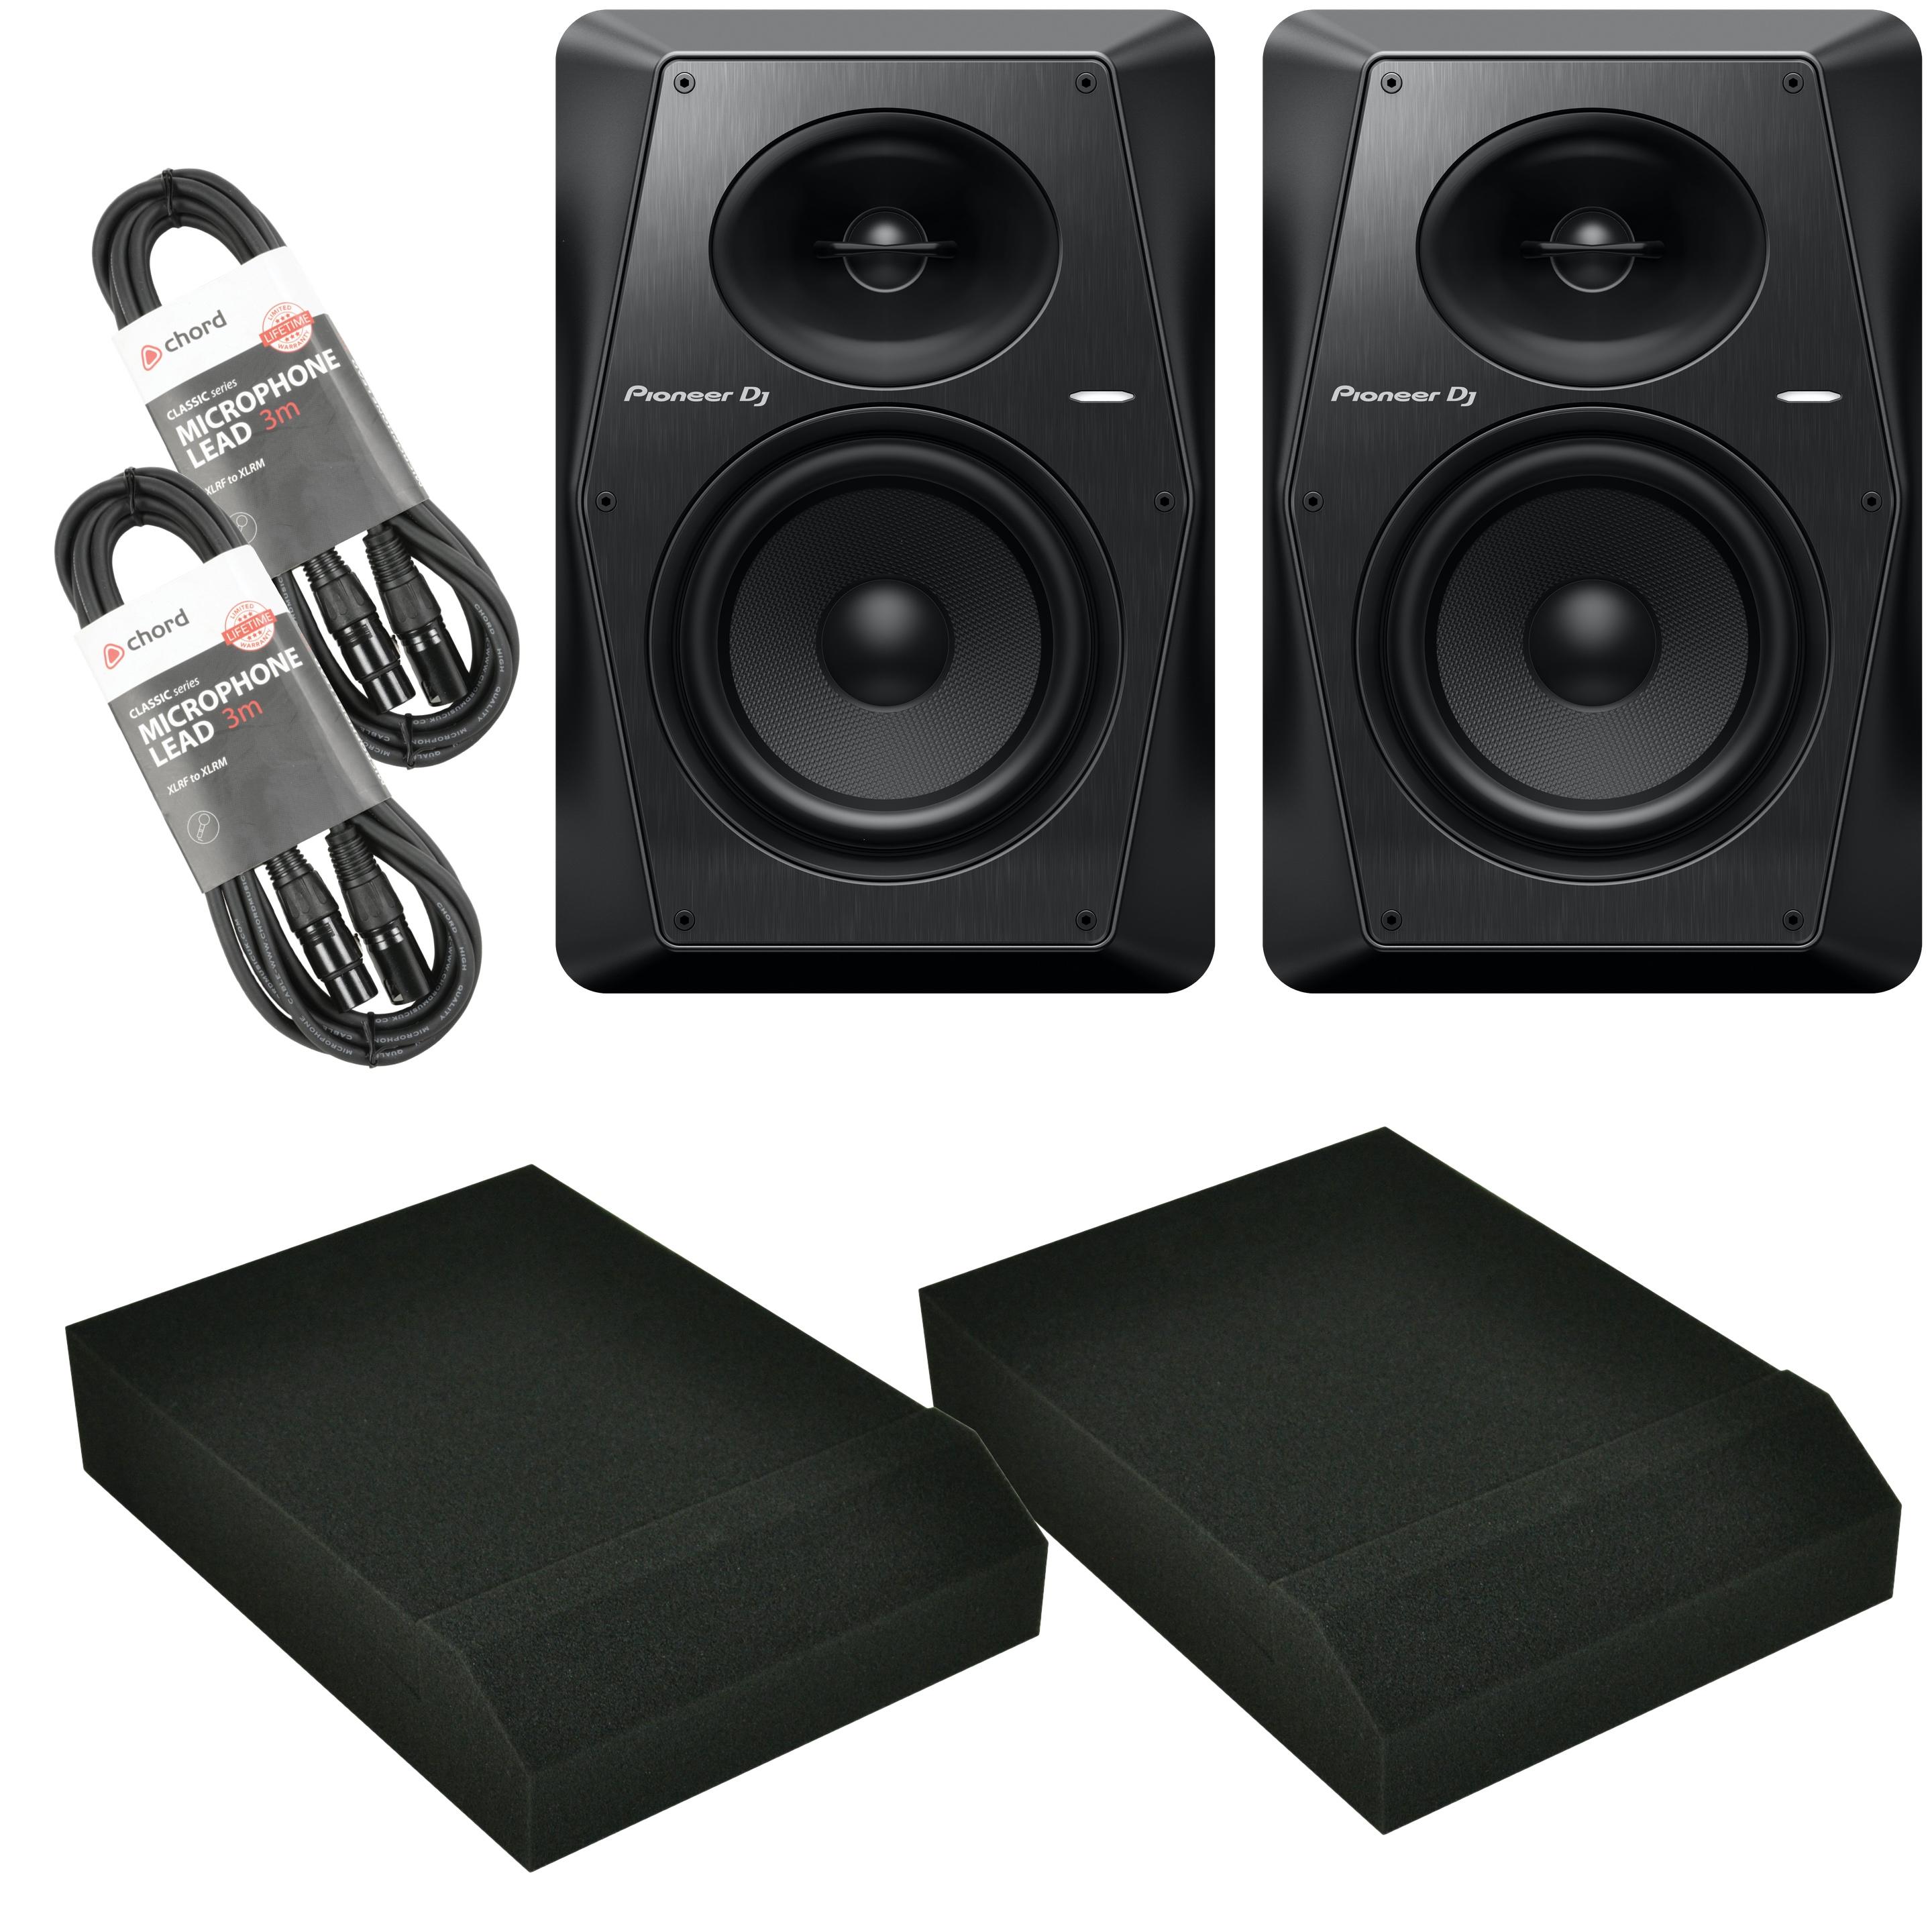 Pioneer DJ VM-70 pair with pads and leads